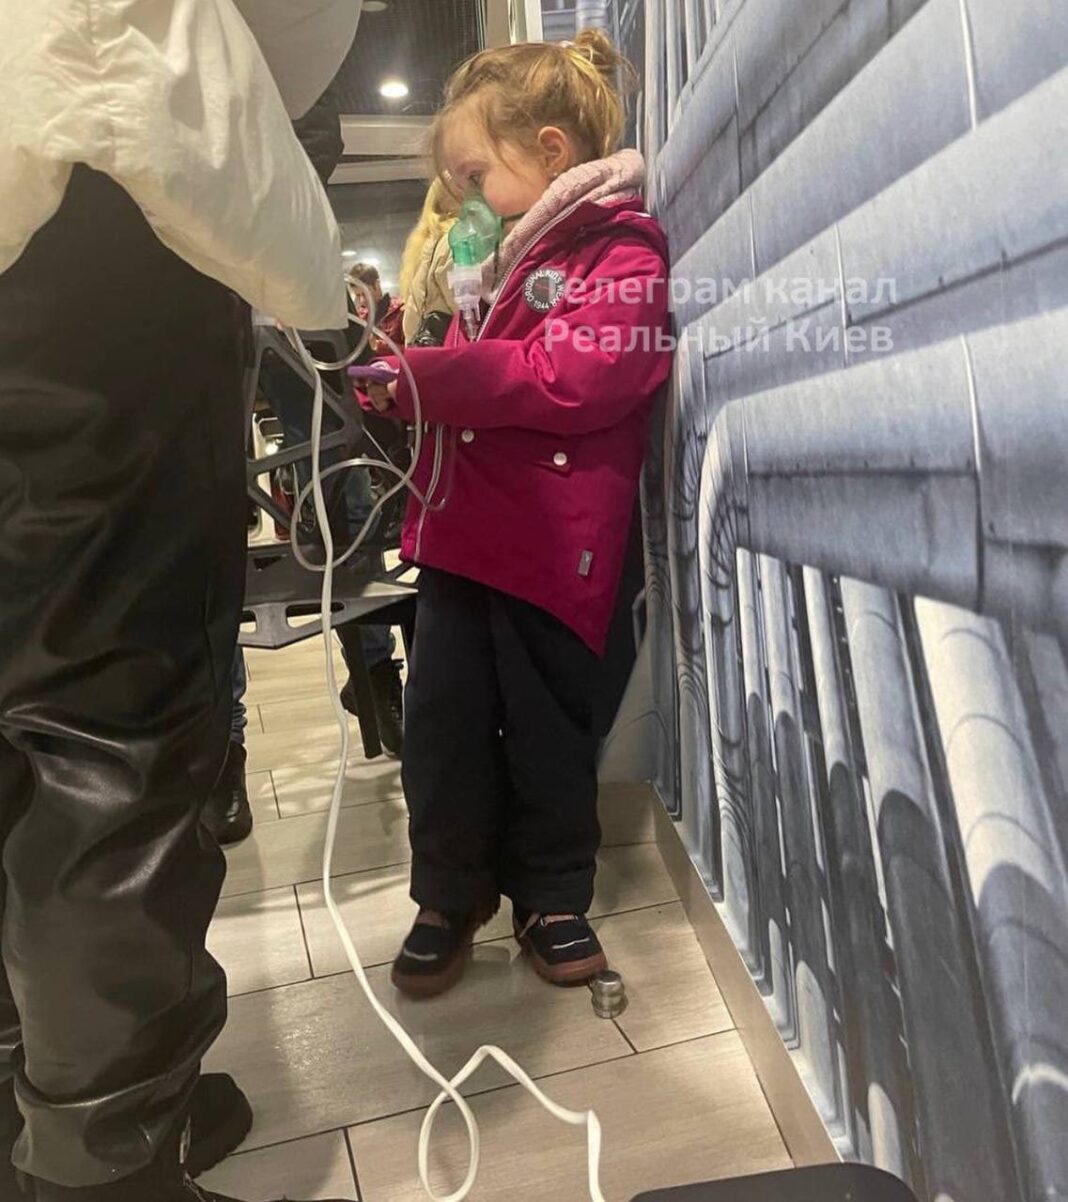 A photo of a baby girl with breathing difficulties being escorted by her parents to a neighbouring gas station in Kyiv to plug in the necessary inhaler for the child quickly became popular on social media